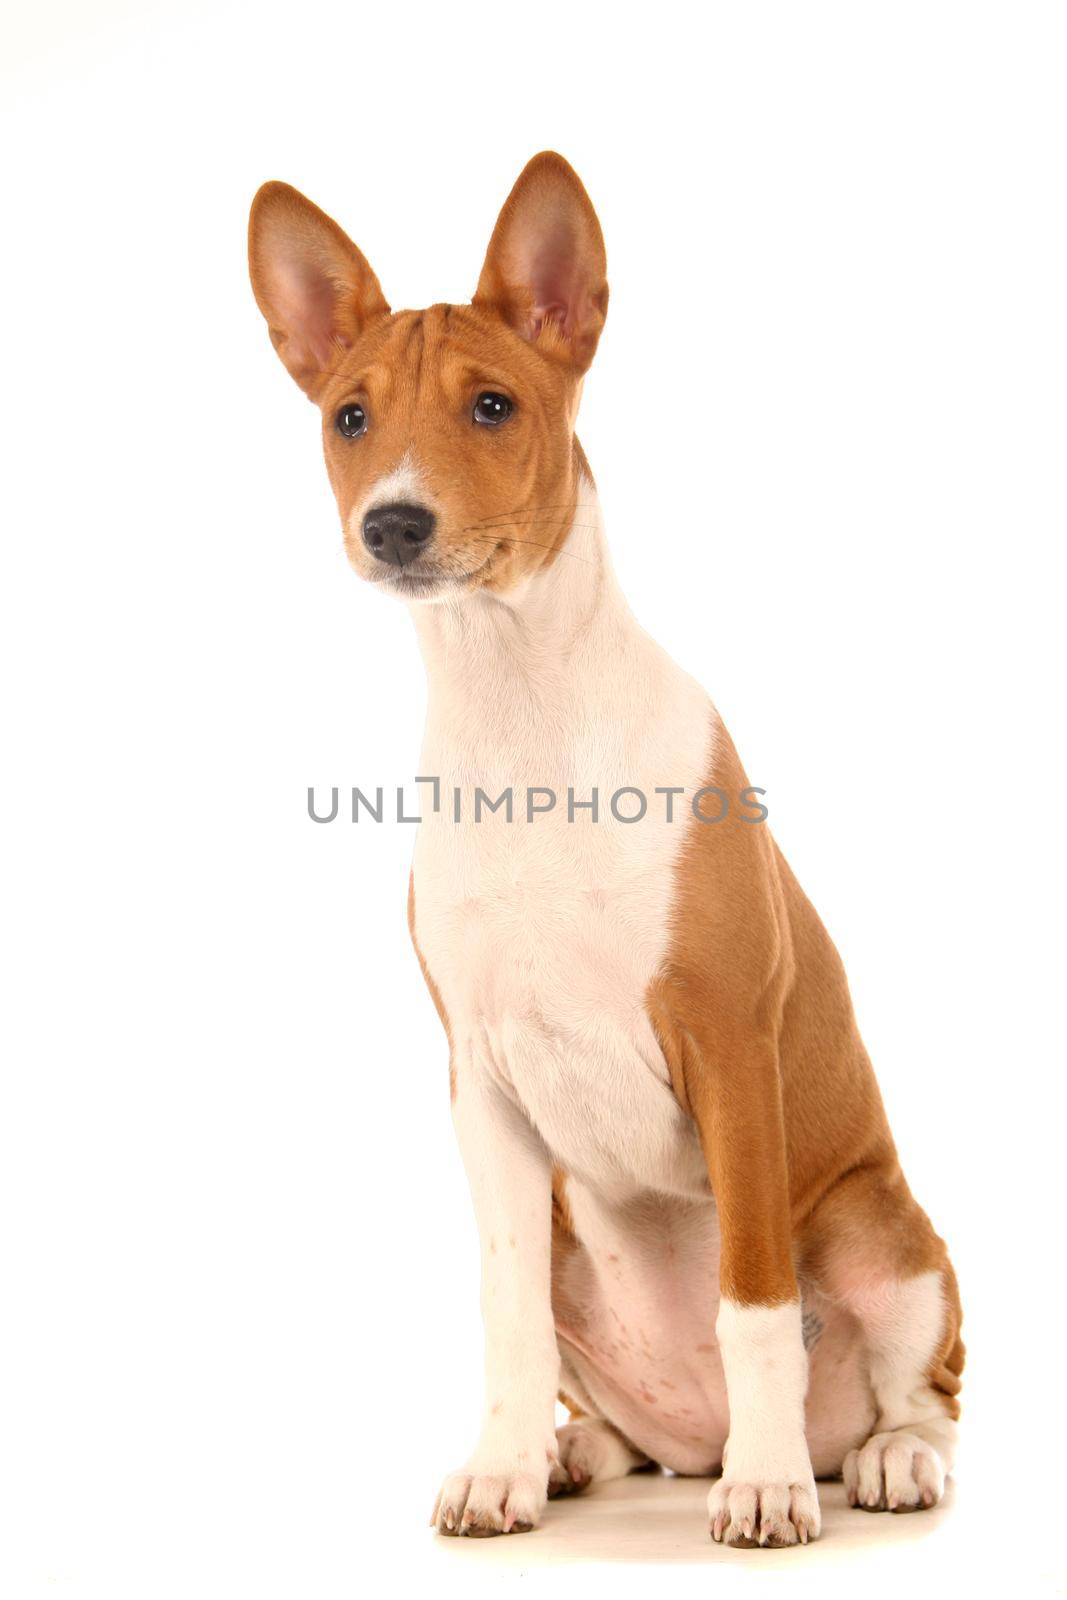 Little Basenji puppy, 2 month, on the white background